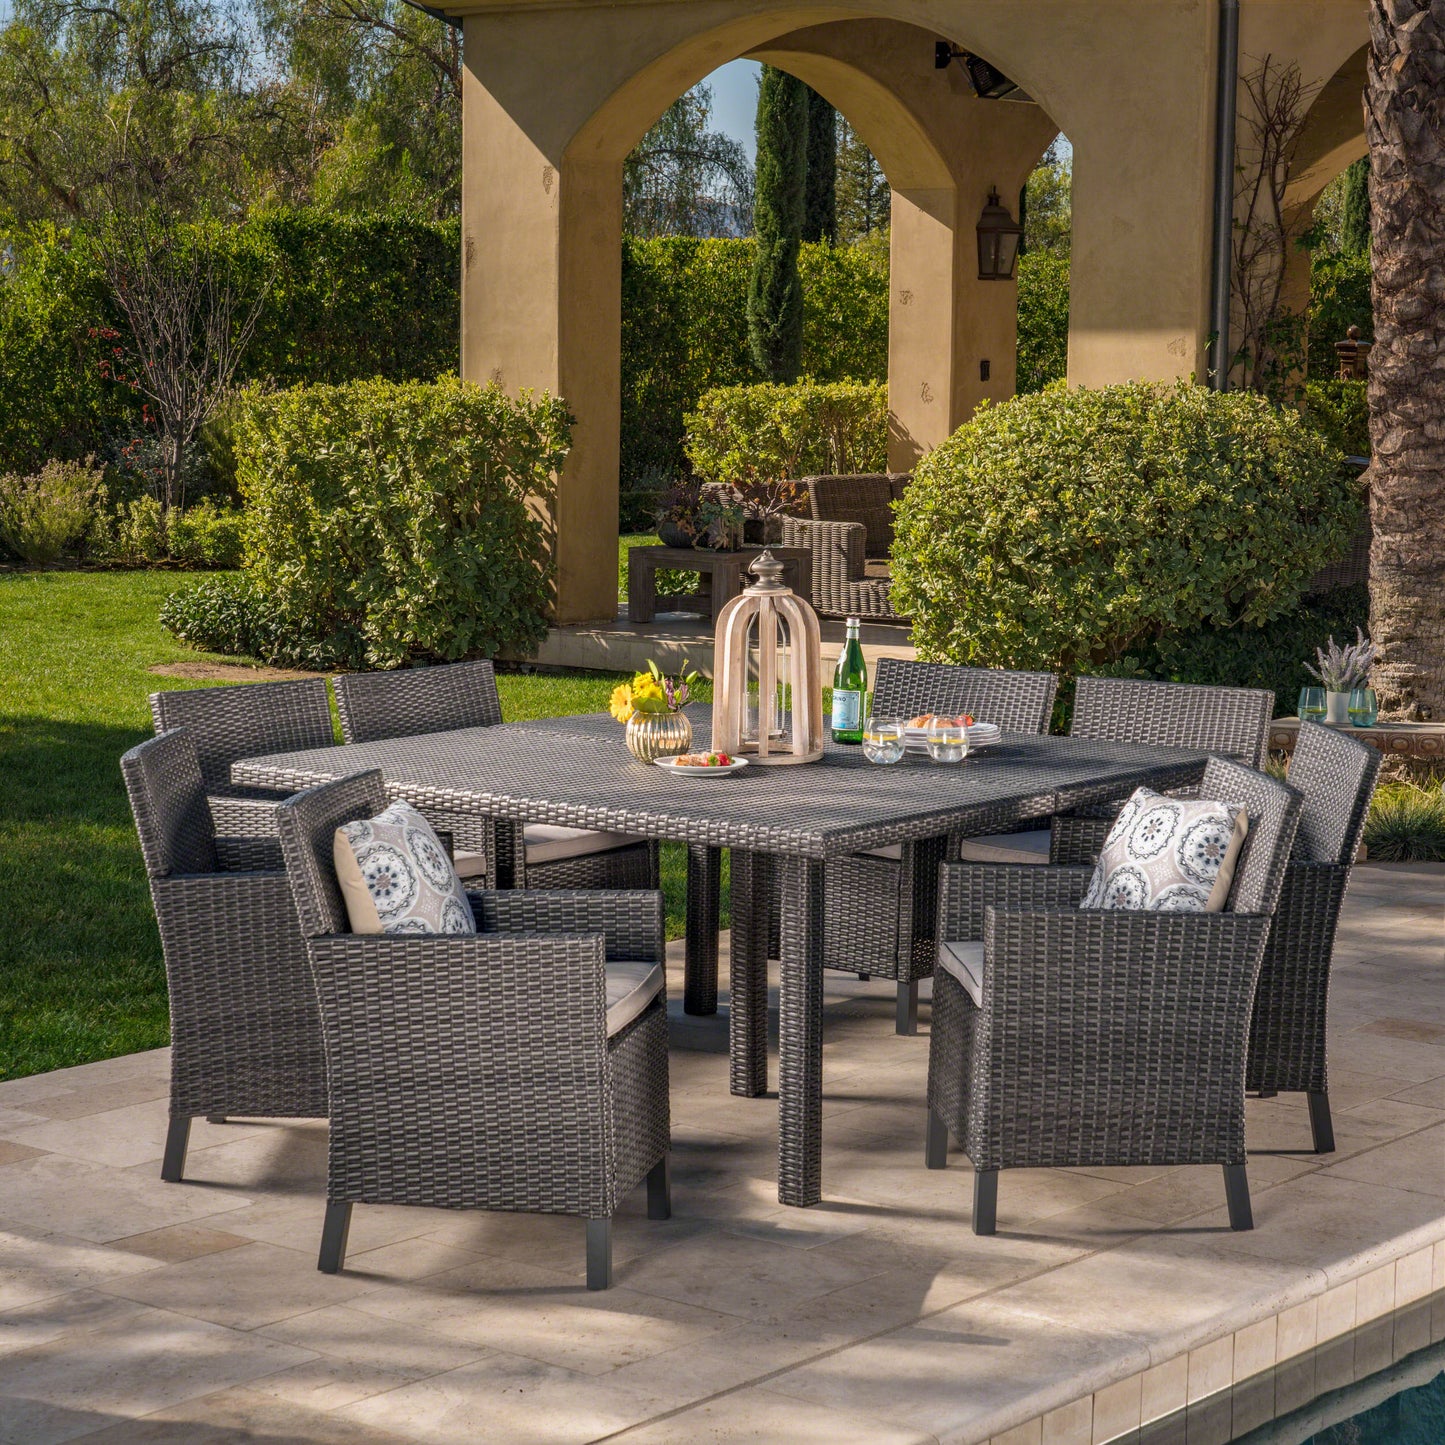 Winford Outdoor 9 Piece Wicker Dining Set with Water Resistant Cushions